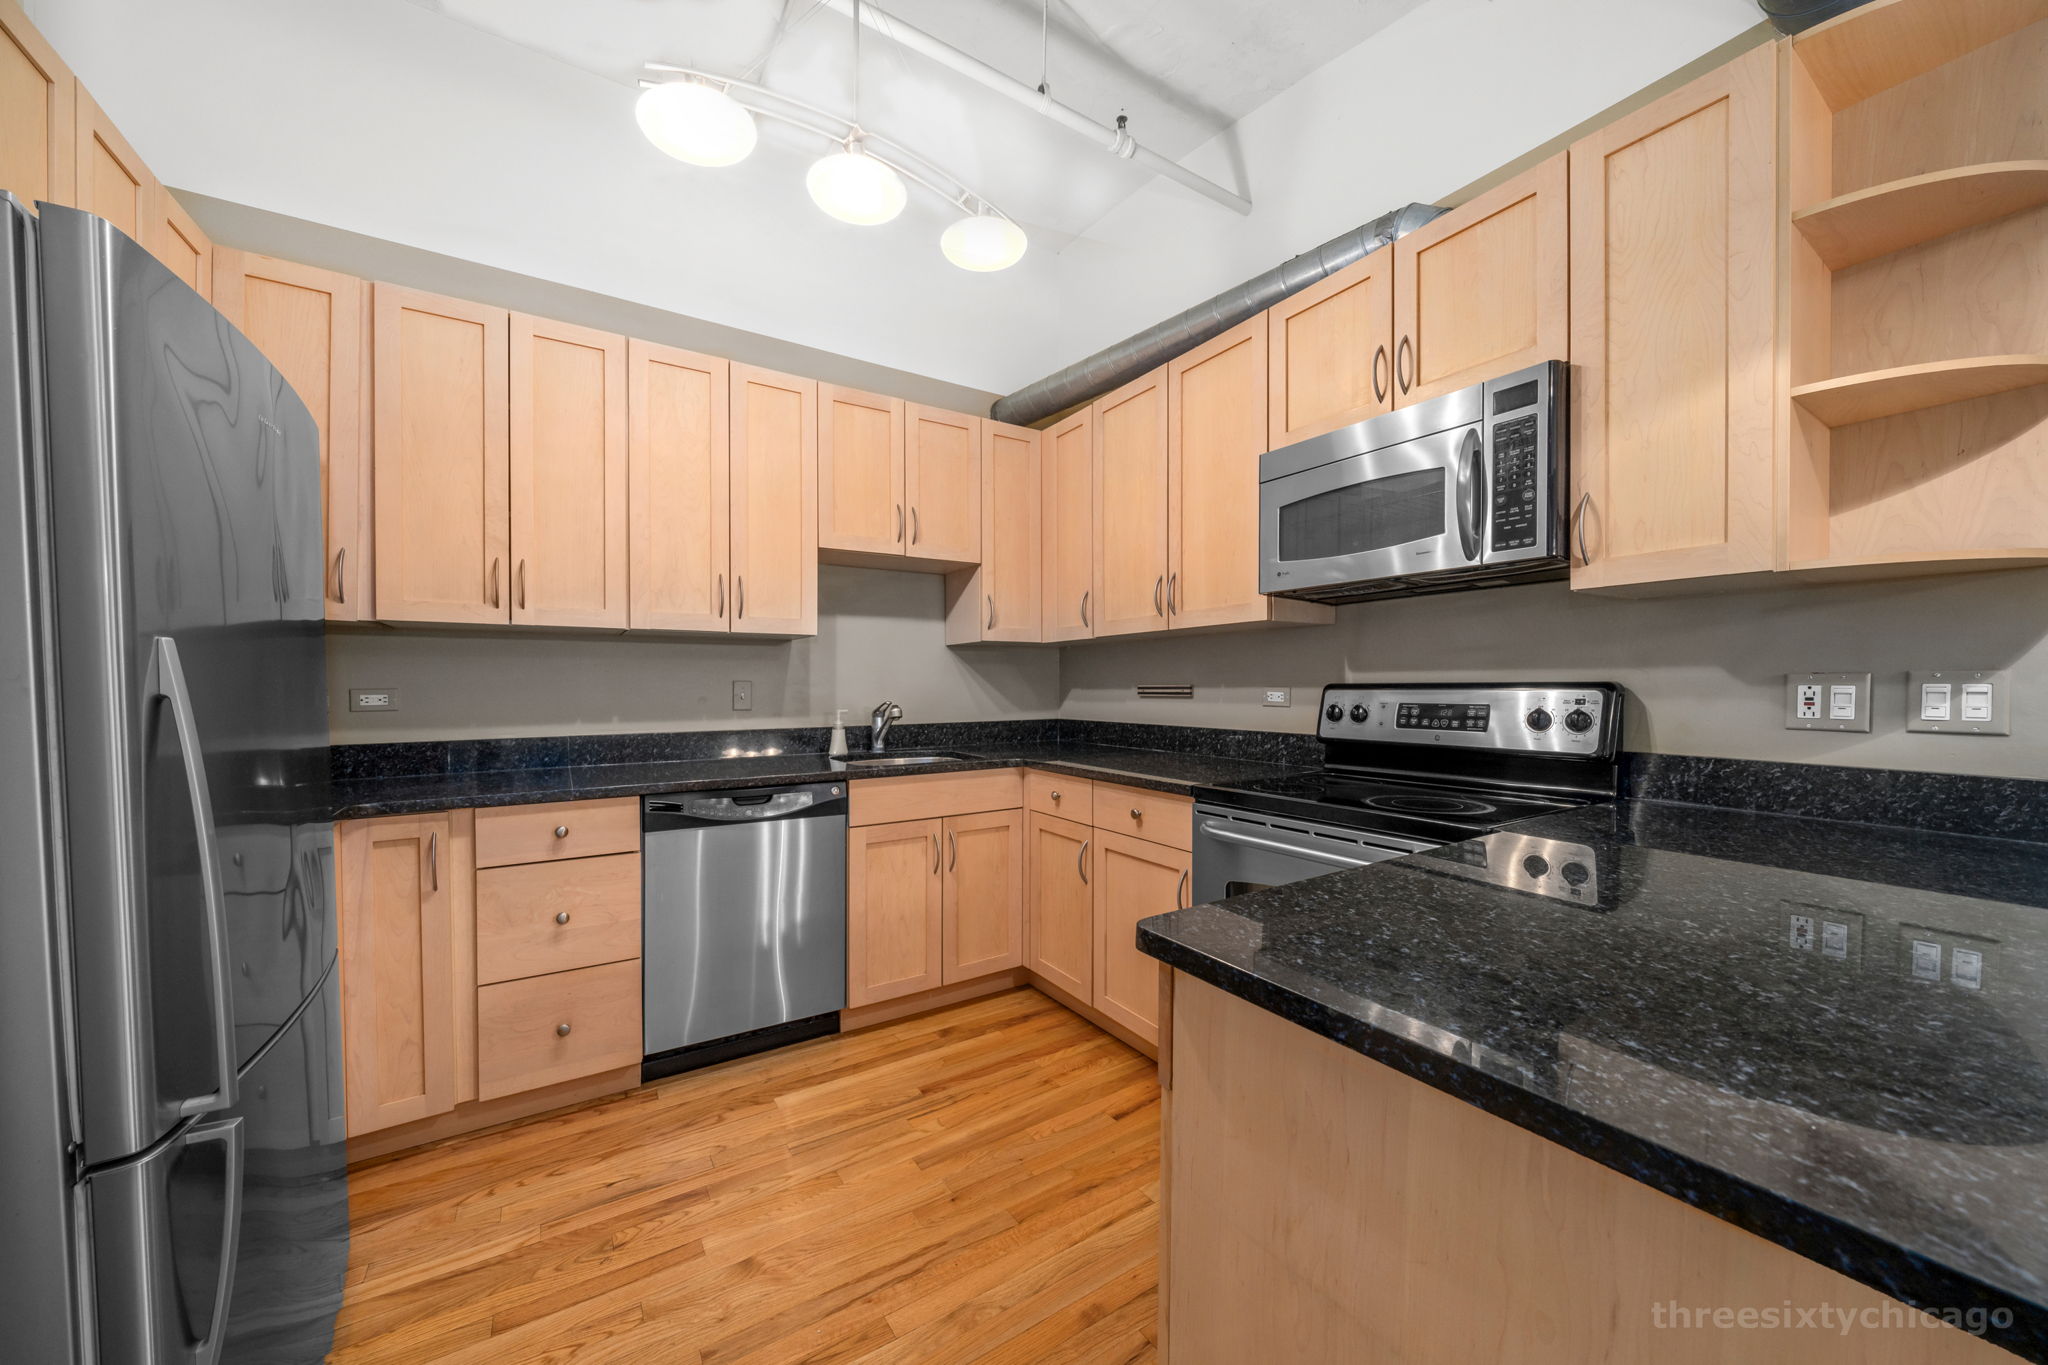  801 S Wells St 807, Chicago, IL 60607, US Photo 11